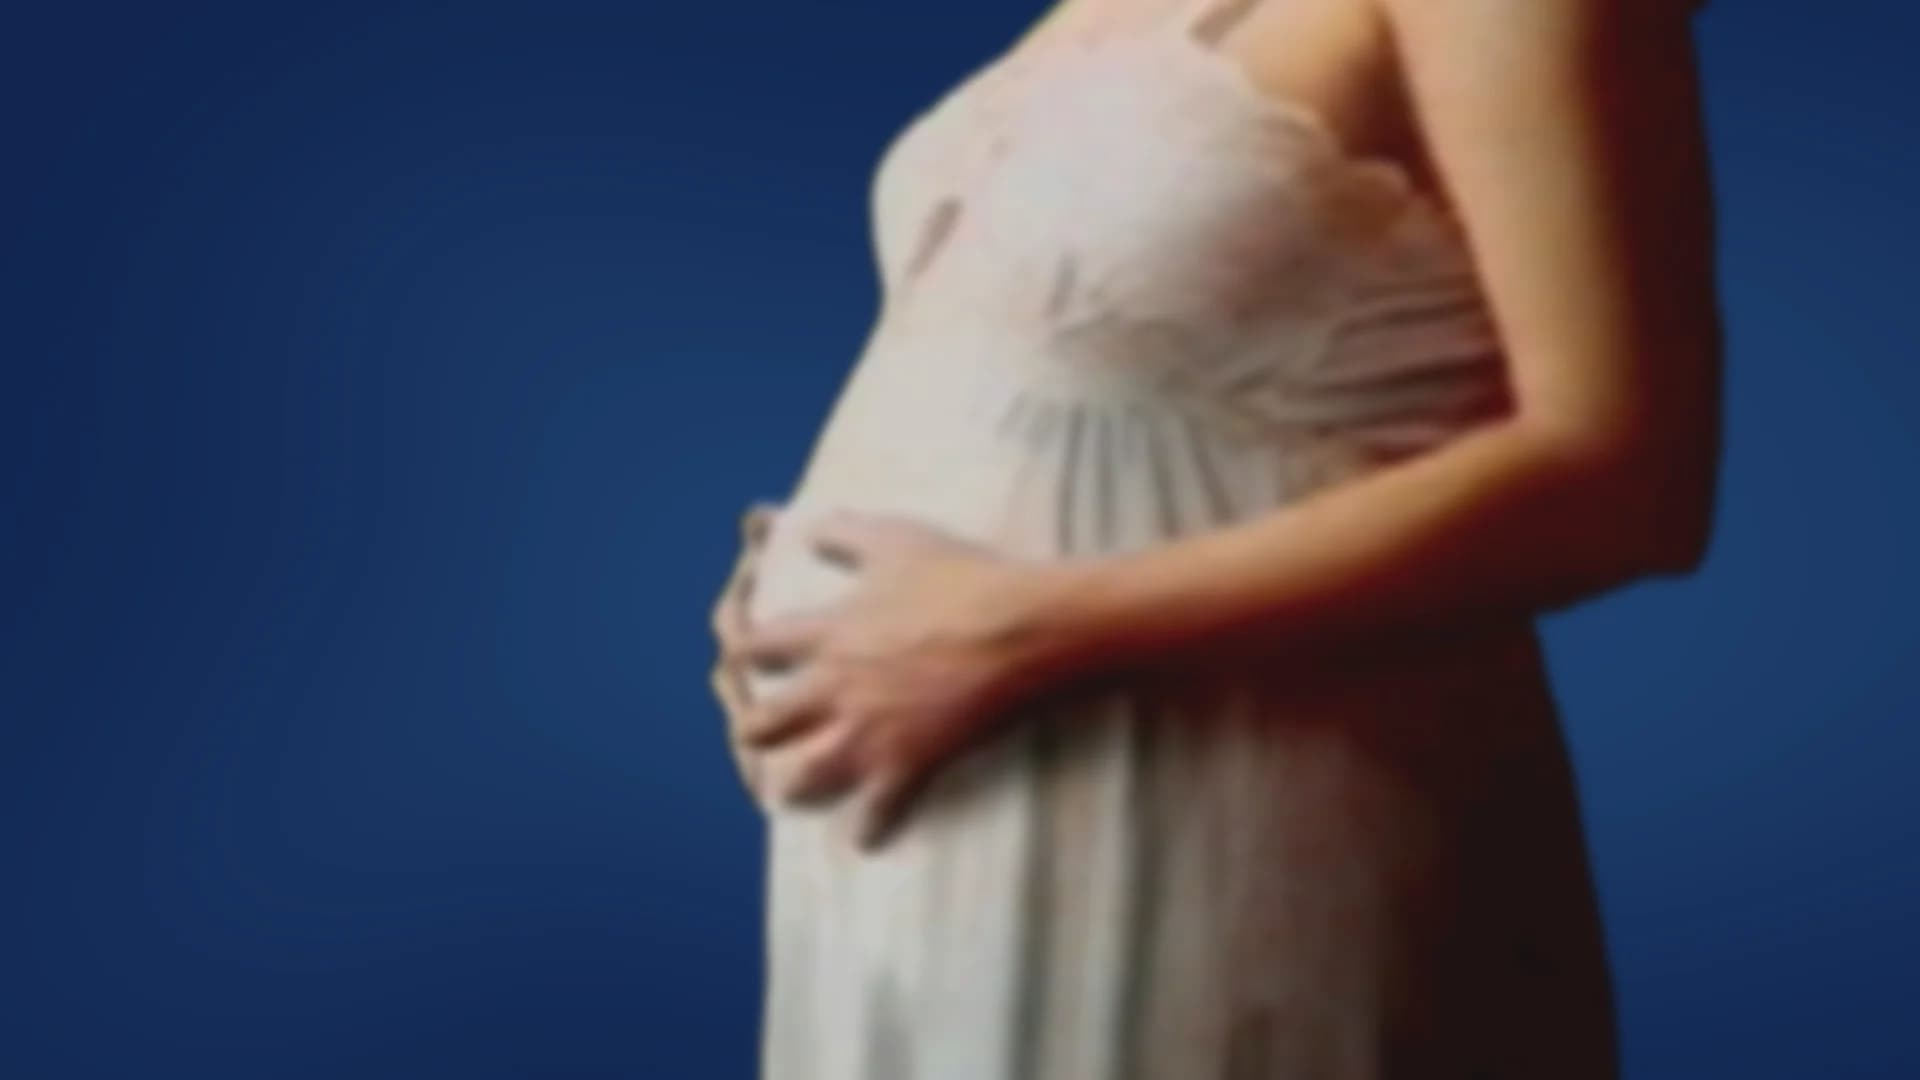 Pregnancy and the coronavirus: What’s the risk? Here is what you need to know